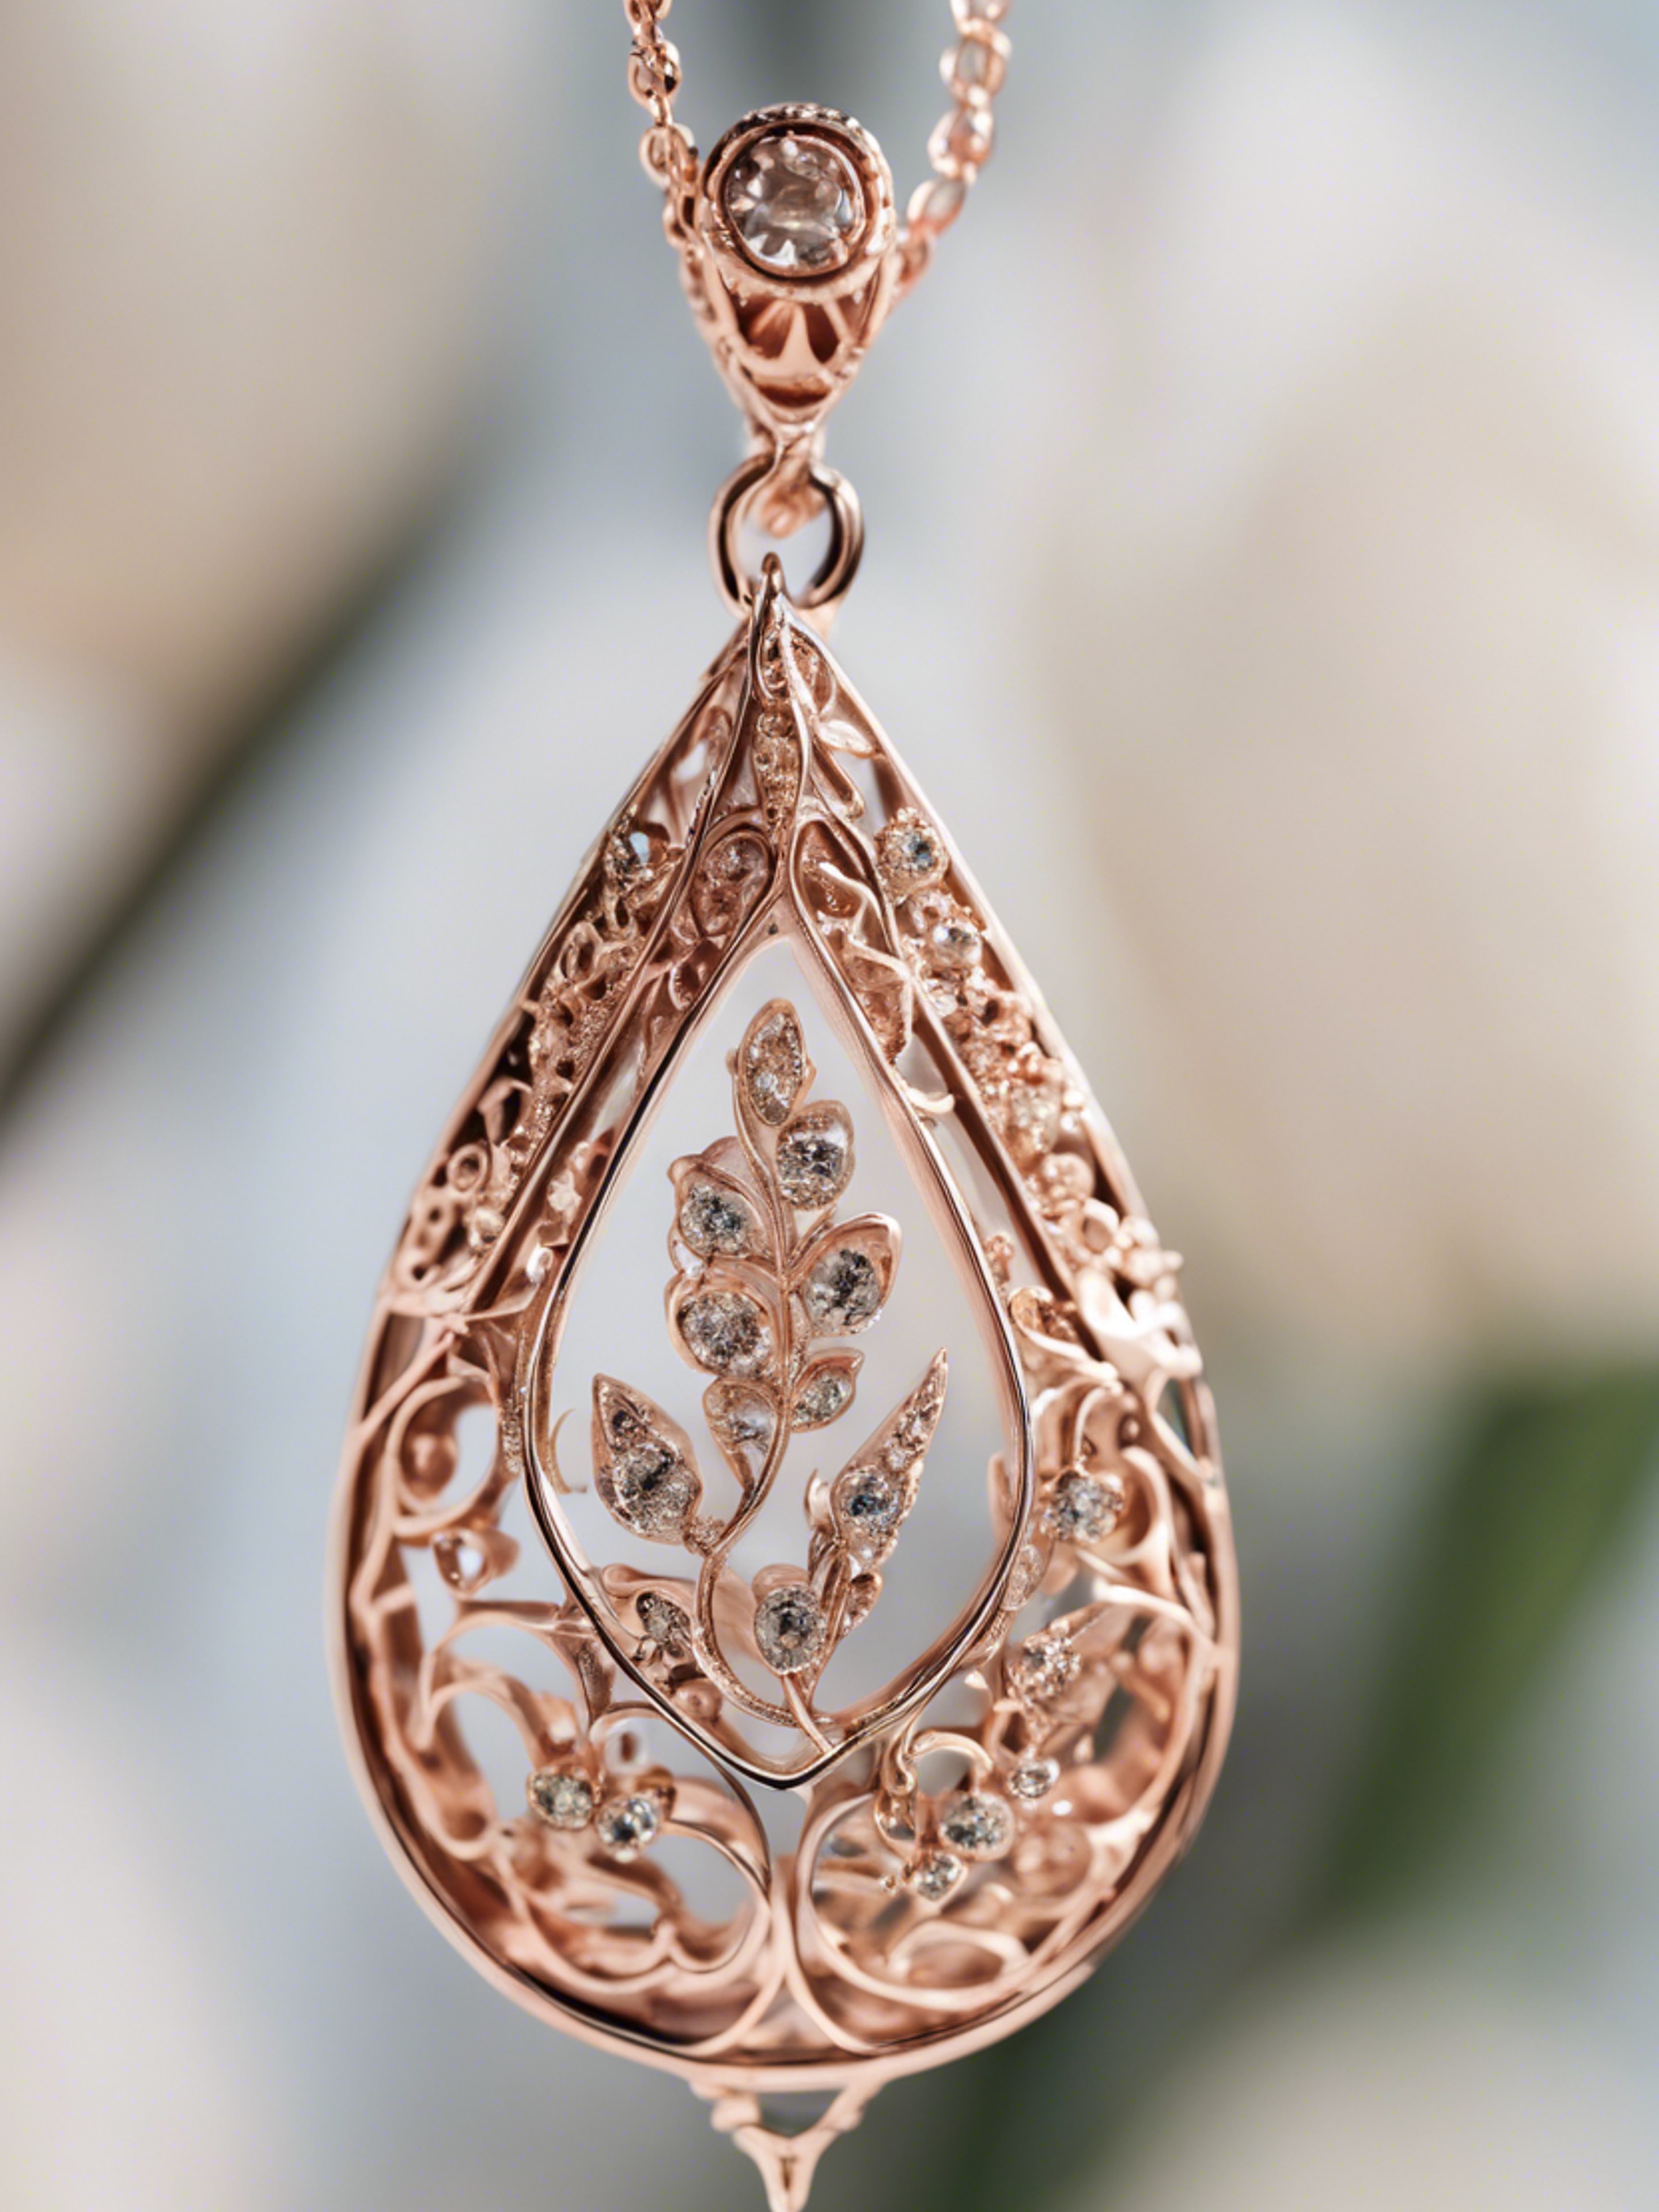 A close-up of a rose gold teardrop-shaped pendant with an intricate, floral design. Обои[94a65aa8484349f1bf09]